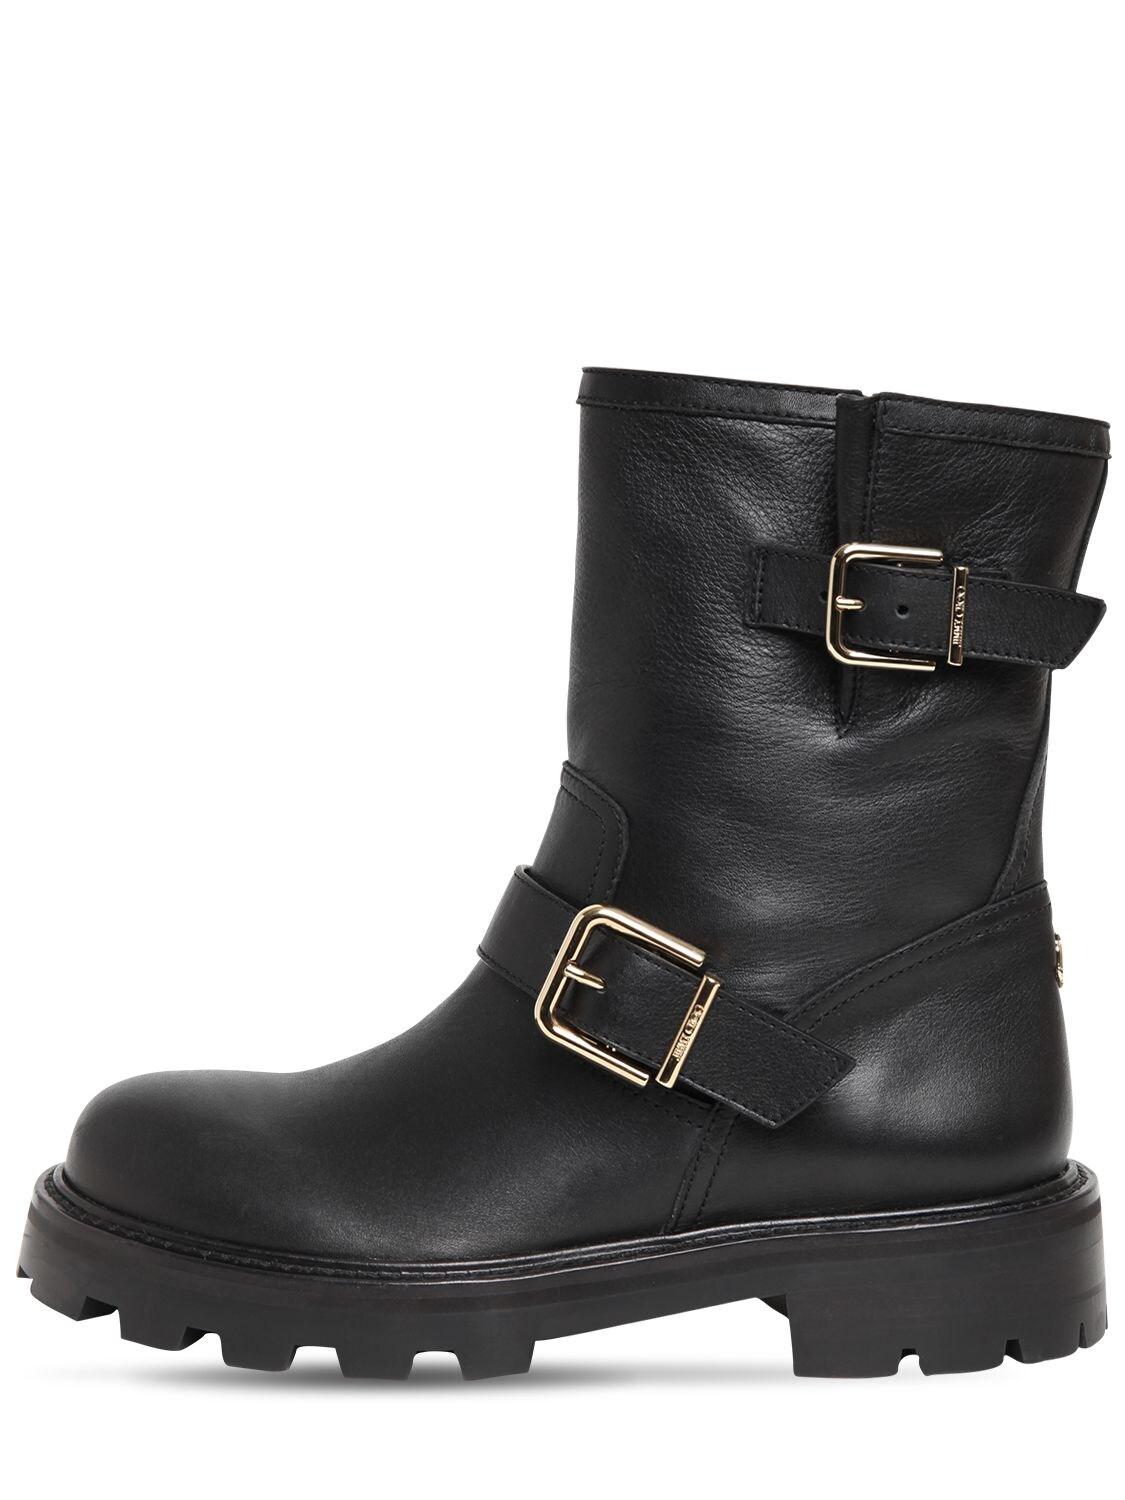 Jimmy Choo 30mm Youth Leather Biker Boots in Black - Save 30% - Lyst